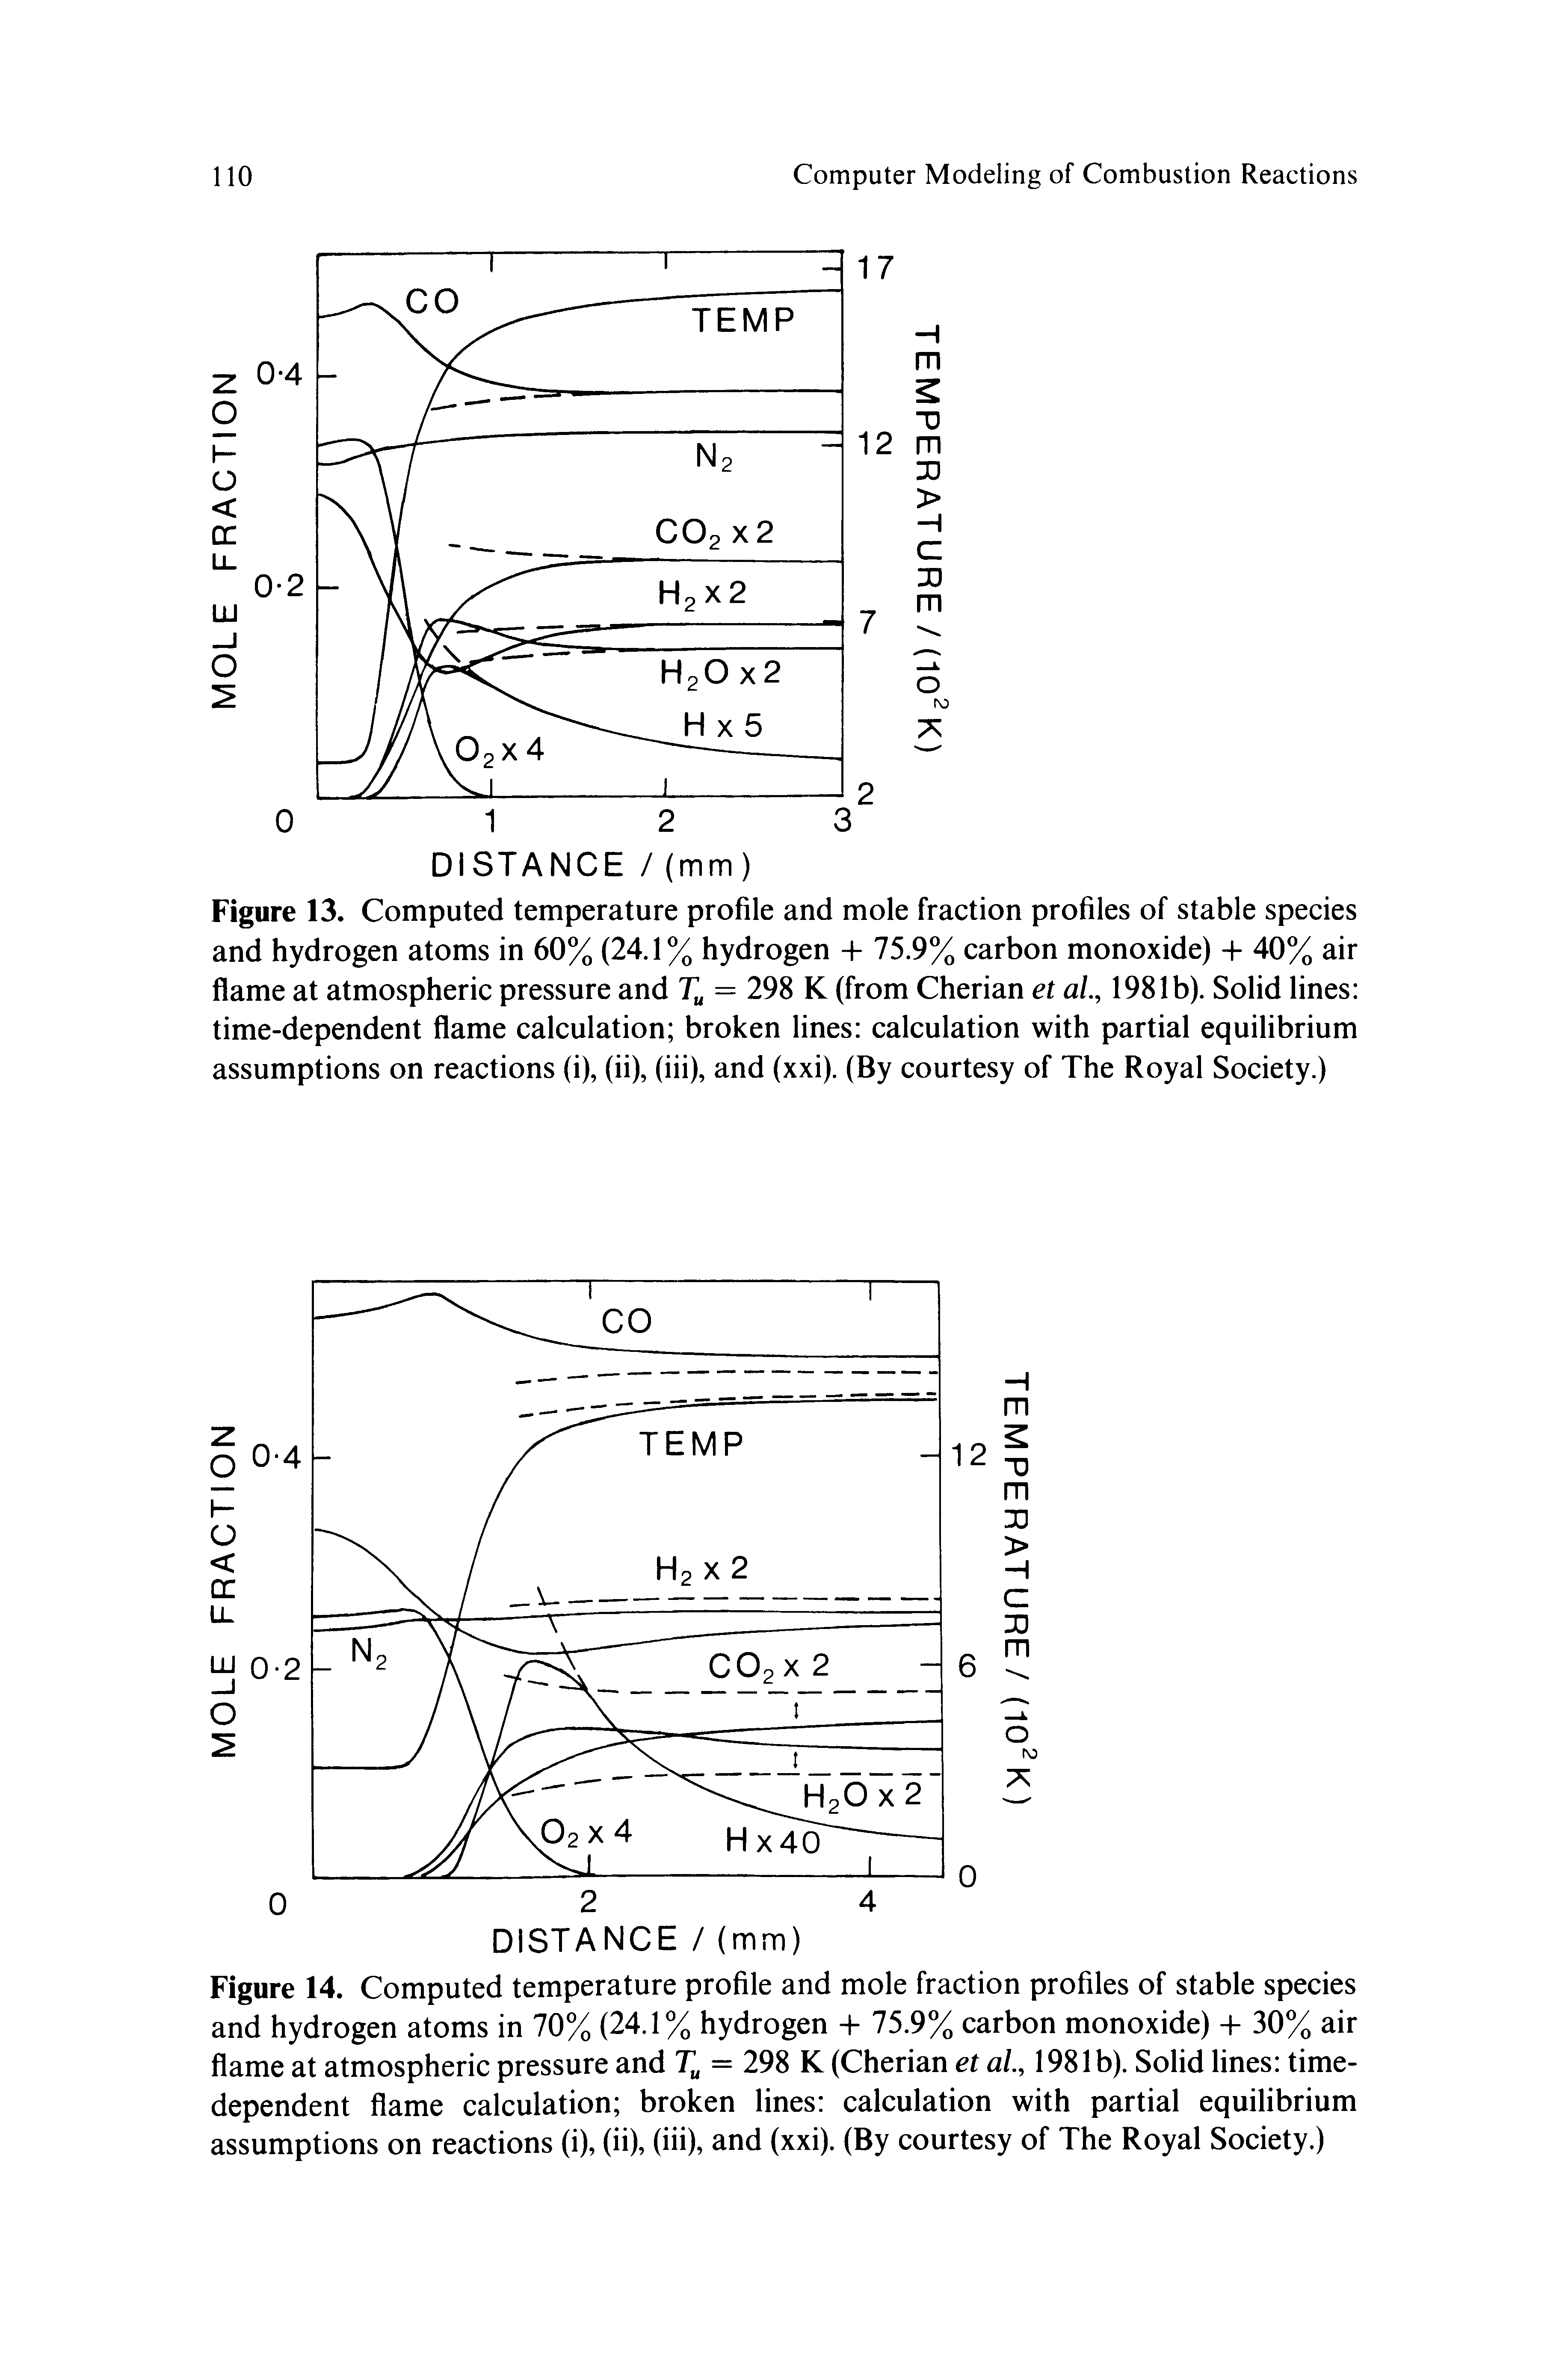 Figure 13. Computed temperature profile and mole fraction profiles of stable species and hydrogen atoms in 60% (24.1% hydrogen + 75.9% carbon monoxide) + 40% air flame at atmospheric pressure and = 298 K (from Cherian et al., 1981b). Solid lines time-dependent flame calculation broken lines calculation with partial equilibrium assumptions on reactions (i), (ii), (iii), and (xxi). (By courtesy of The Royal Society.)...